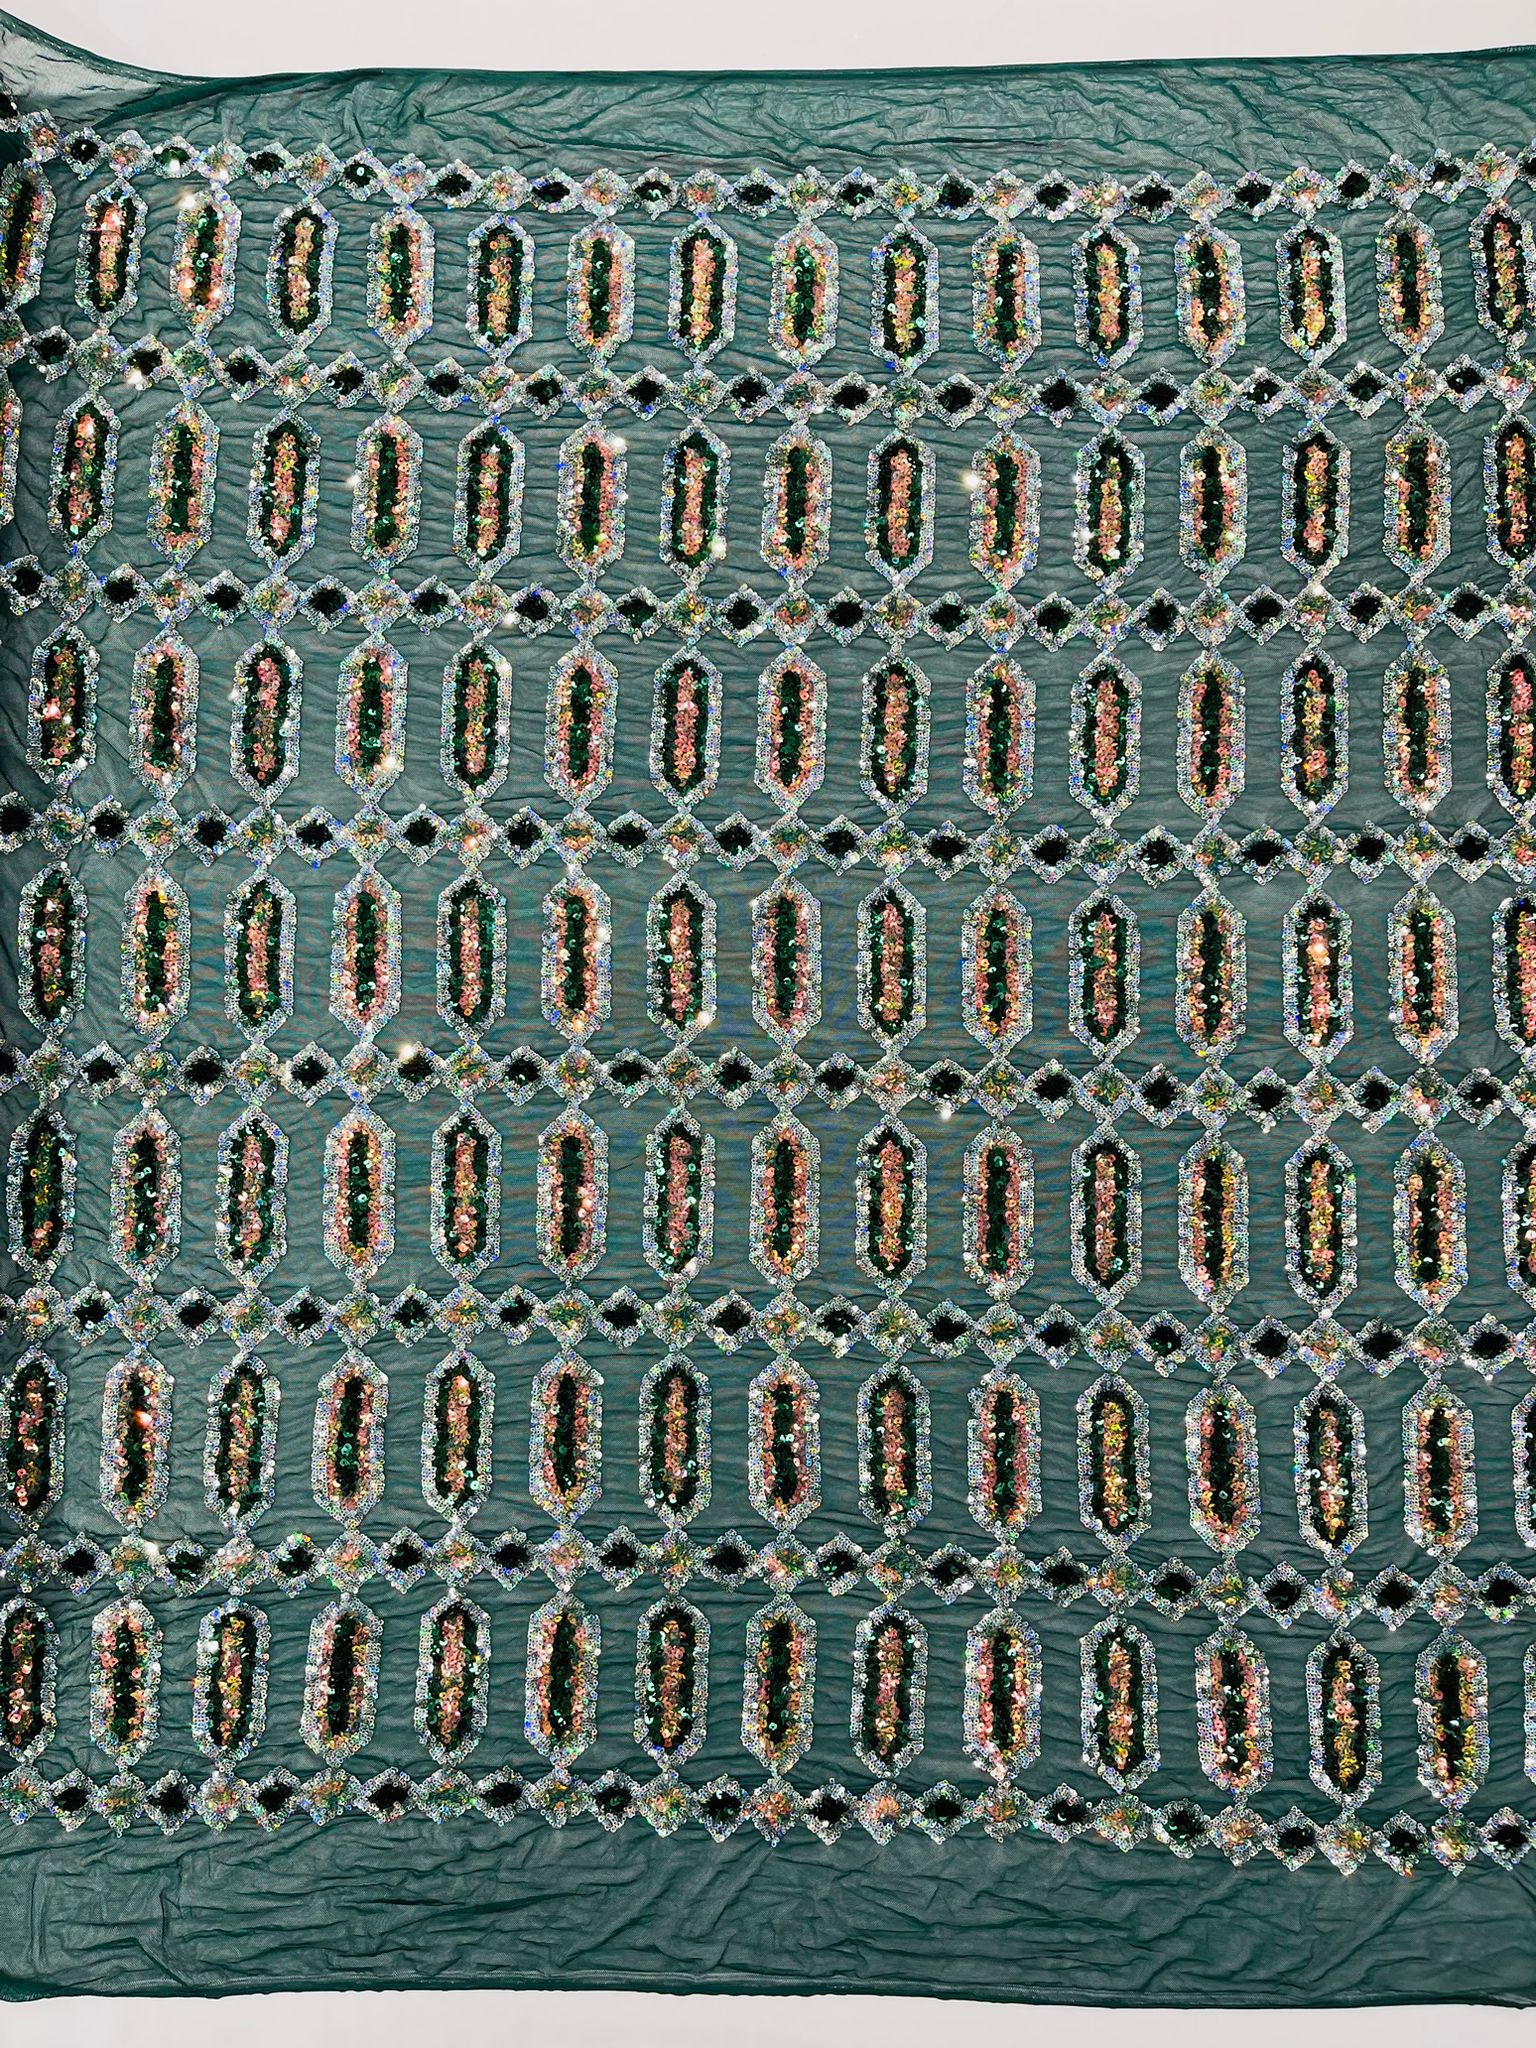 Emerald/Silver multi color iridescent Jewel sequin design on a Green 4 way stretch mesh fabric.